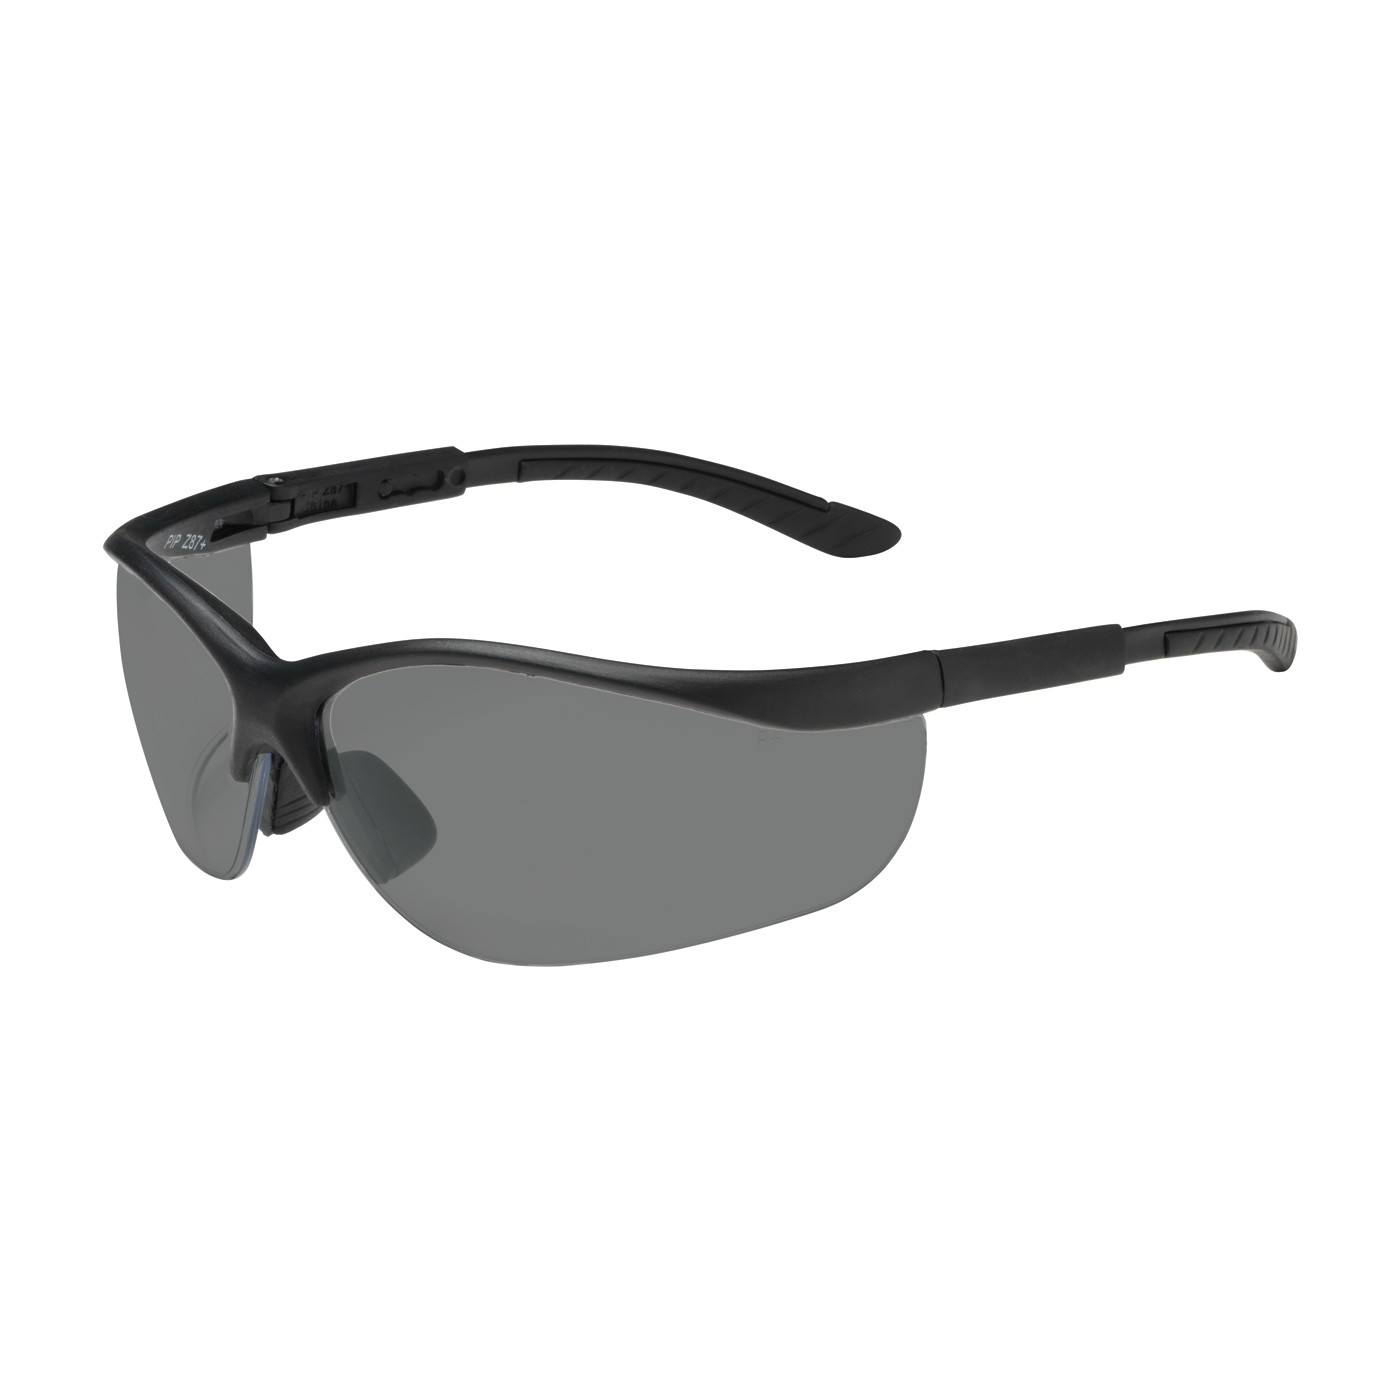  Hi-Voltage AC™ Semi-Rimless Safety Glasses with Black Frame, Gray Lens and Anti-Scratch / Anti-Fog Coating  (#250-21-0421)